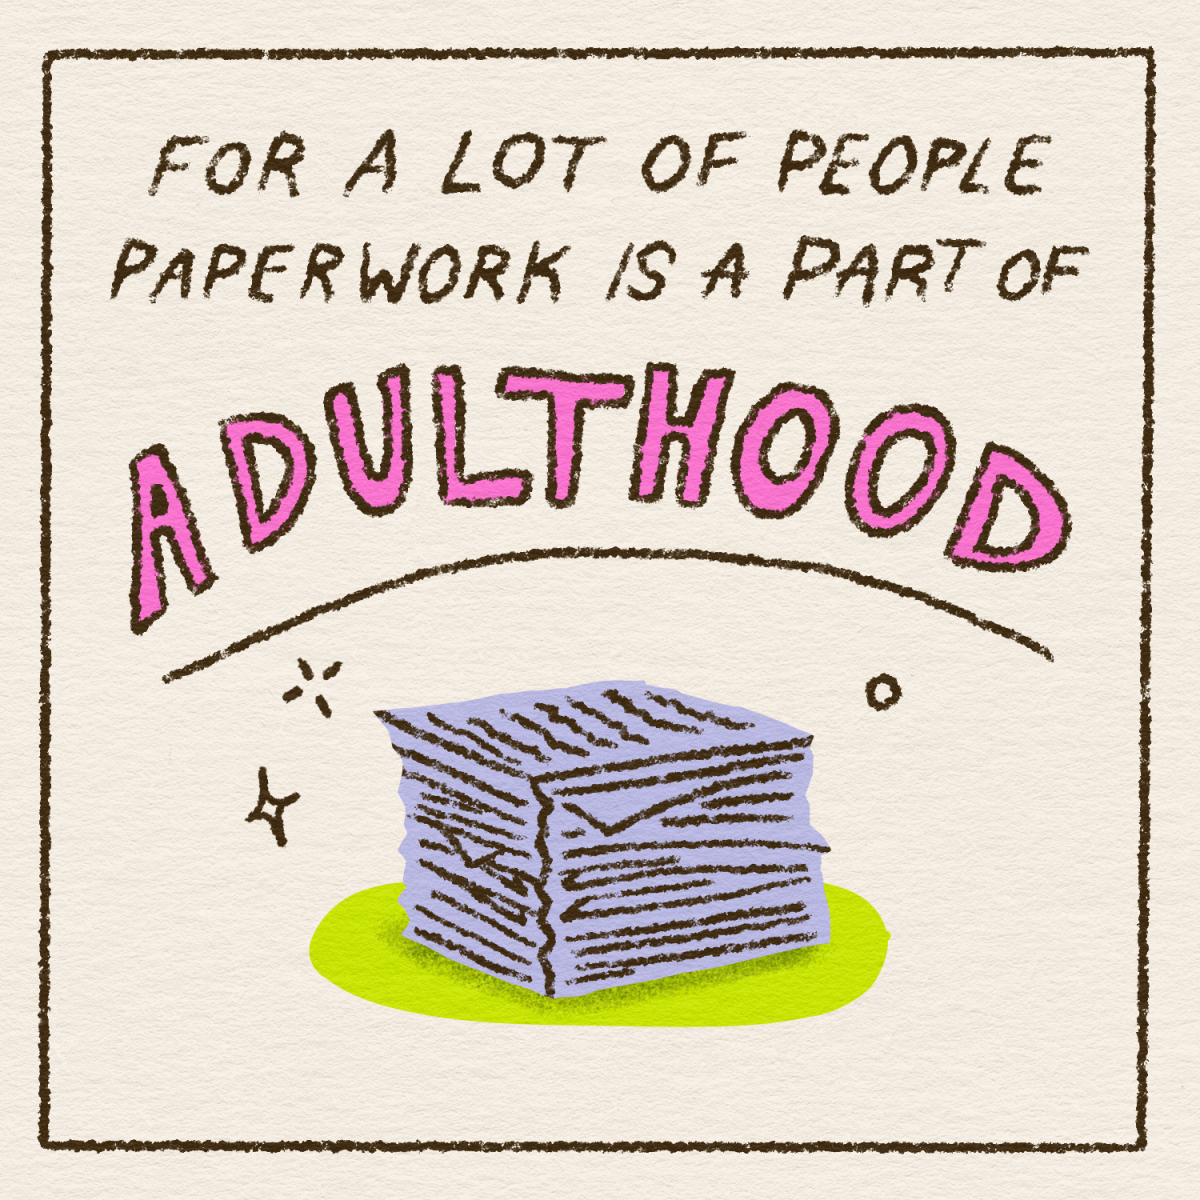 For a lot of people paperwork is part of adulthood